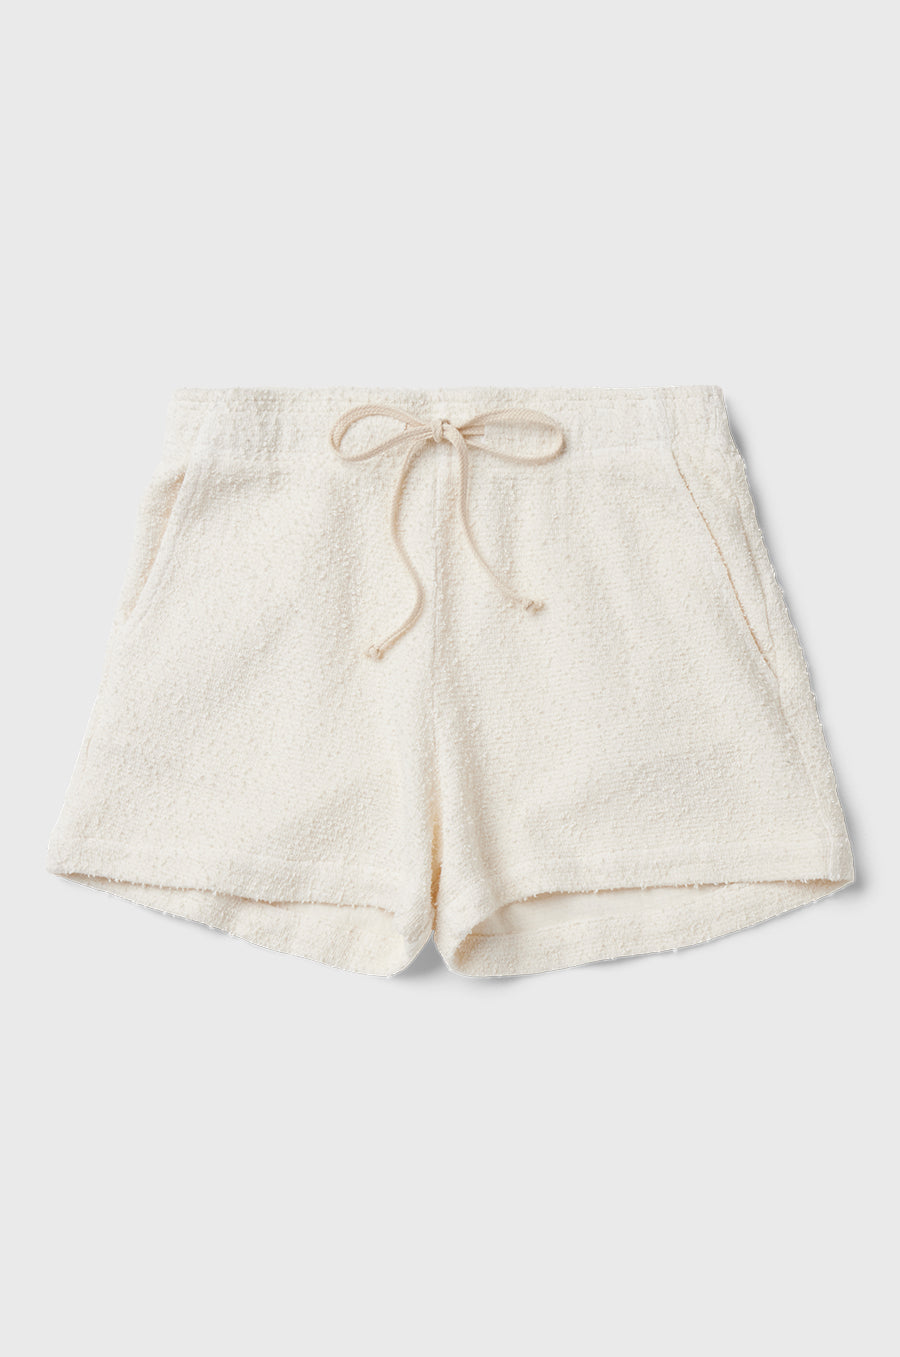 the lady & the sailor Weekend Short in Vanilla Boucle.